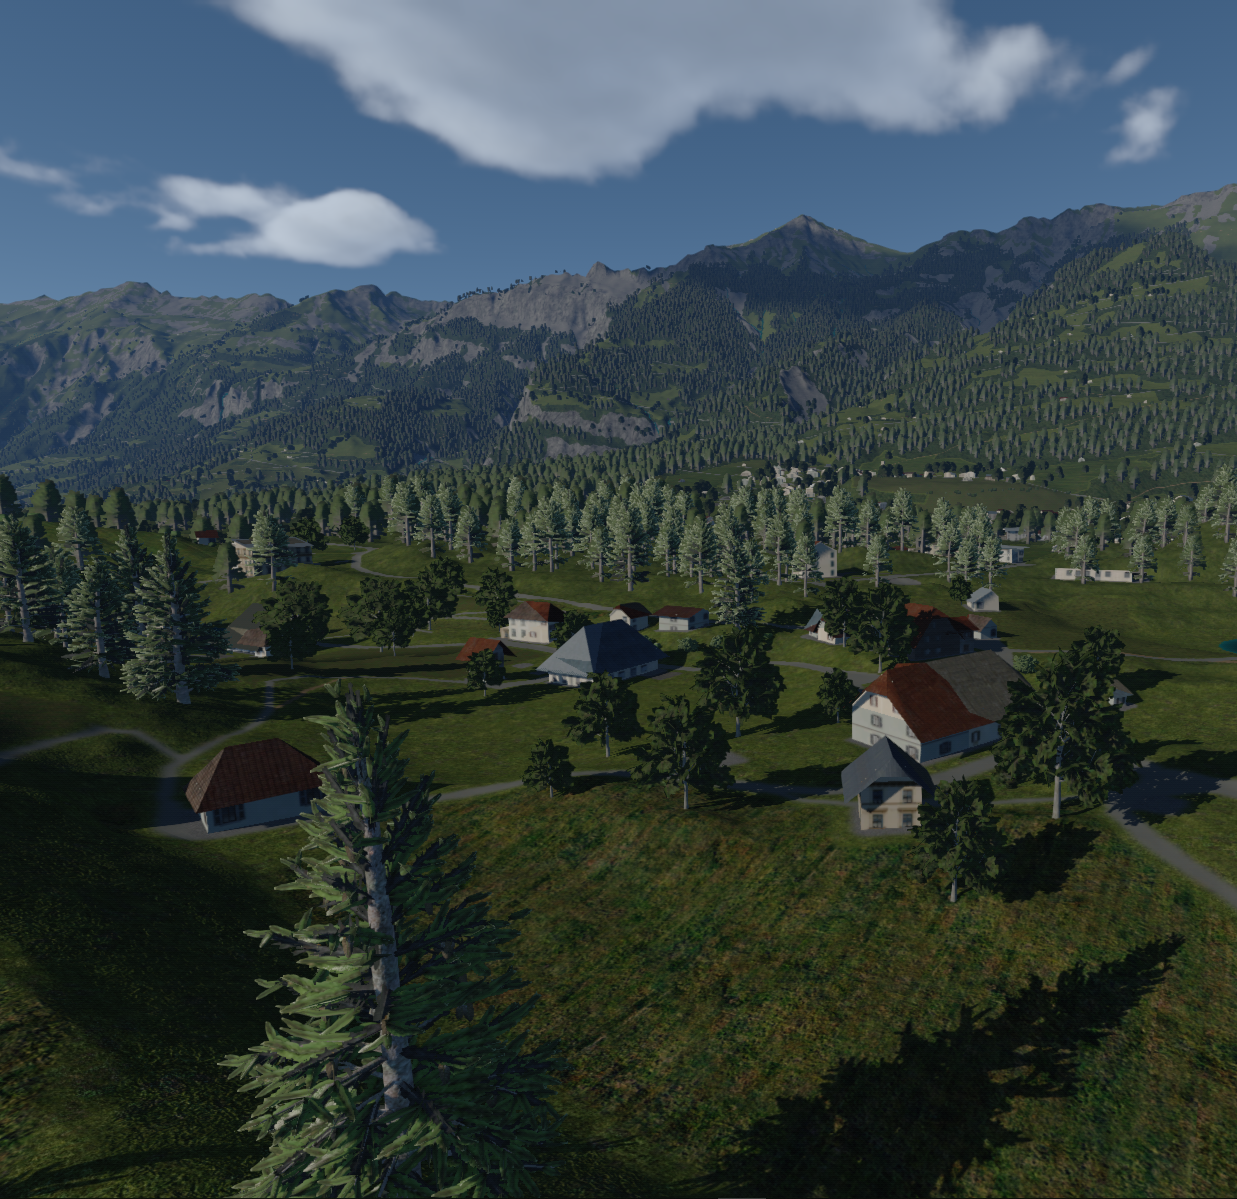 <p>Terrains are highly populated with vegetation, allowing the user to train in a highly realistic virtual environment.</p>
